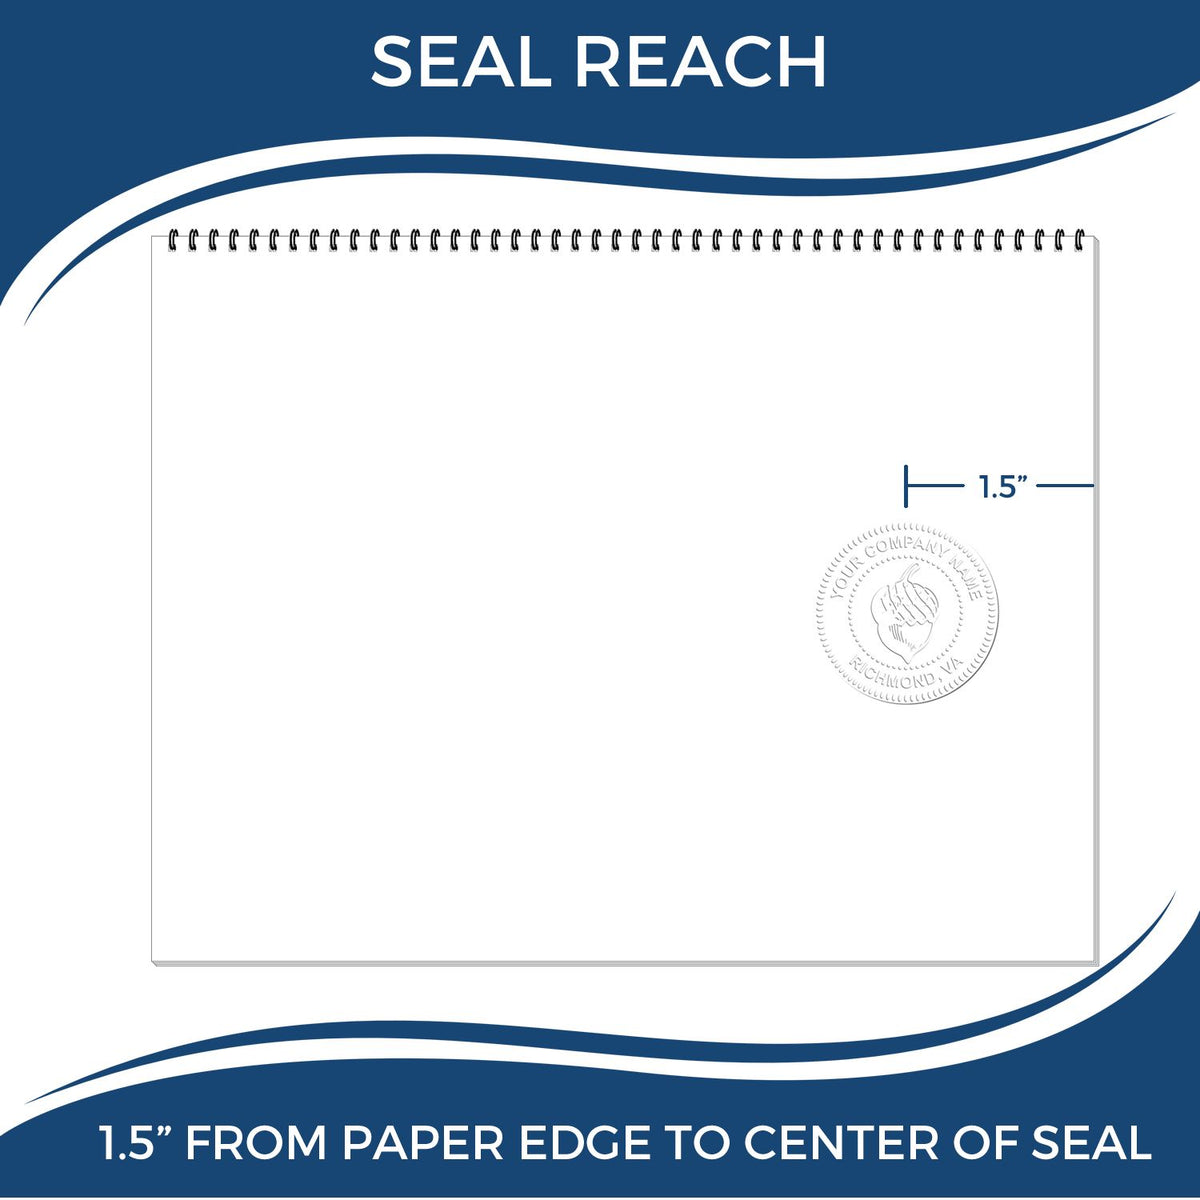 An infographic showing the seal reach which is represented by a ruler and a miniature seal image of the Hybrid Virginia Geologist Seal